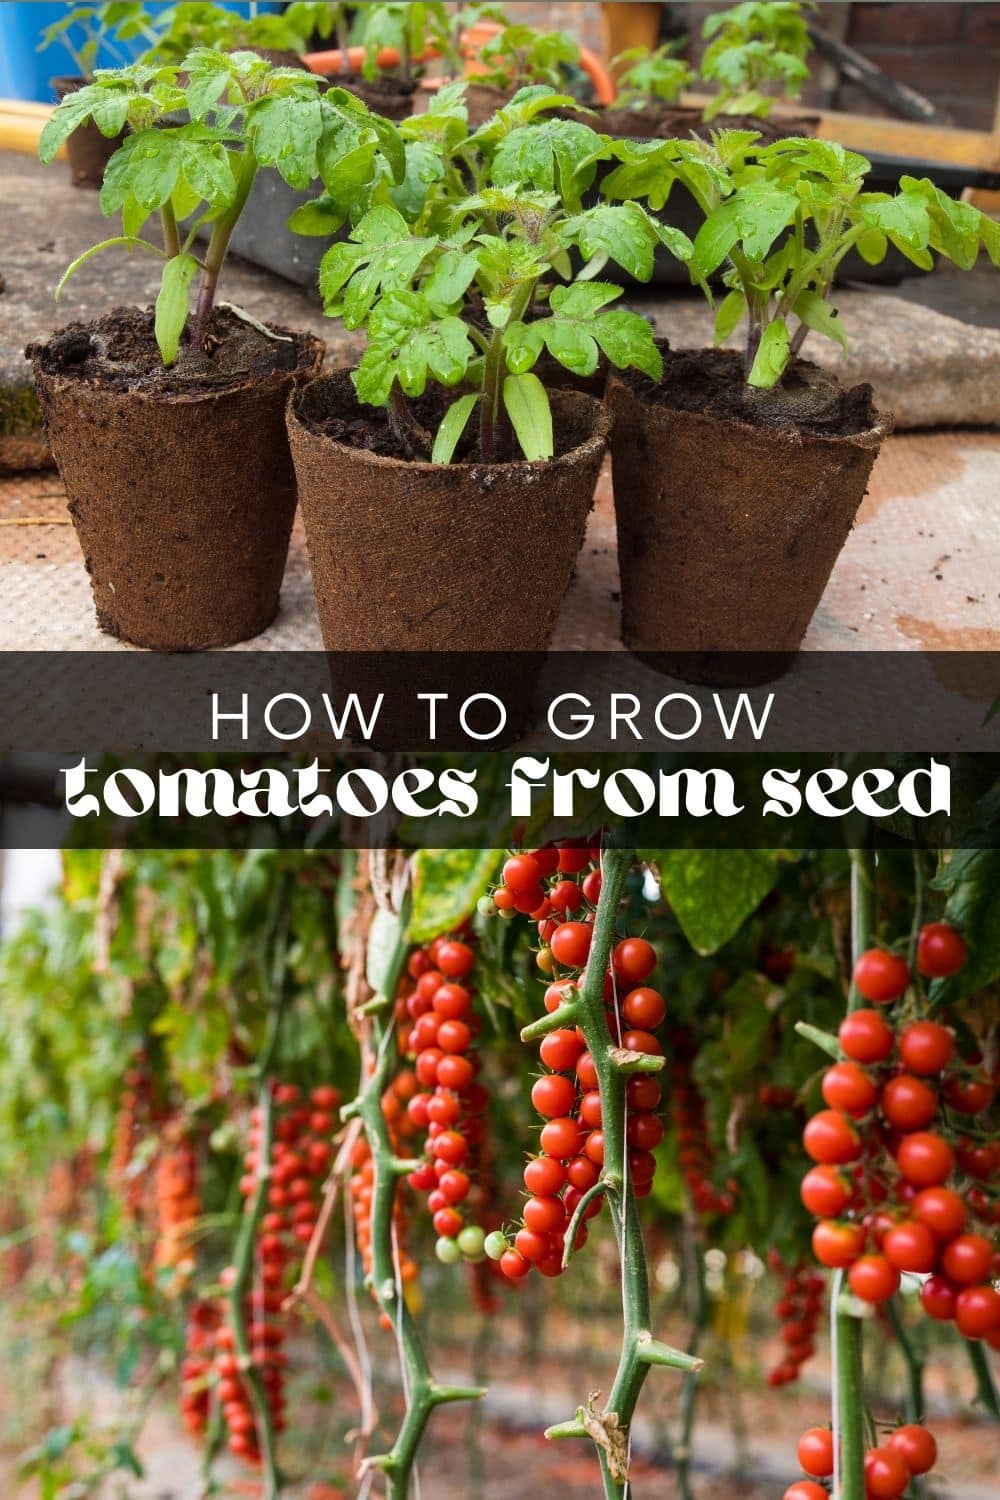 Growing tomatoes at home is super easy and requires little maintenance. All they need is good soil, enough sun, and plenty of water! Anyone can learn how to grow tomatoes, no matter how much gardening experience you have.